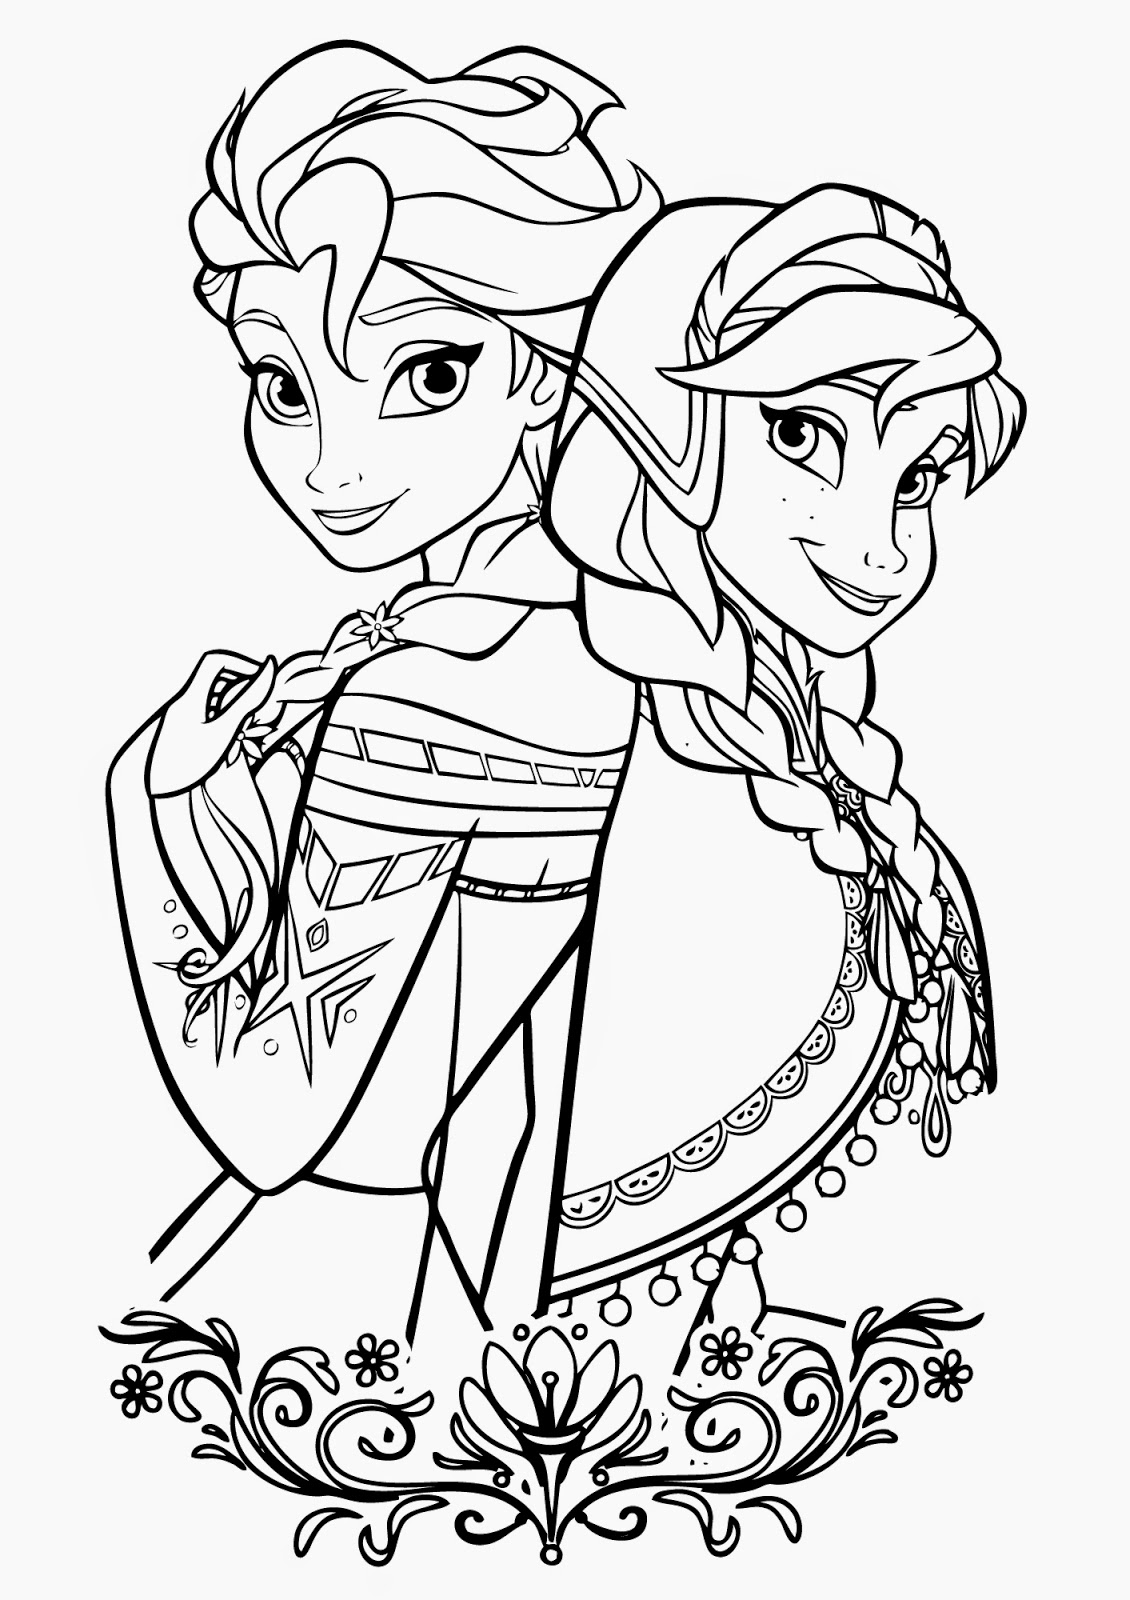 Frozen coloring #20, Download drawings